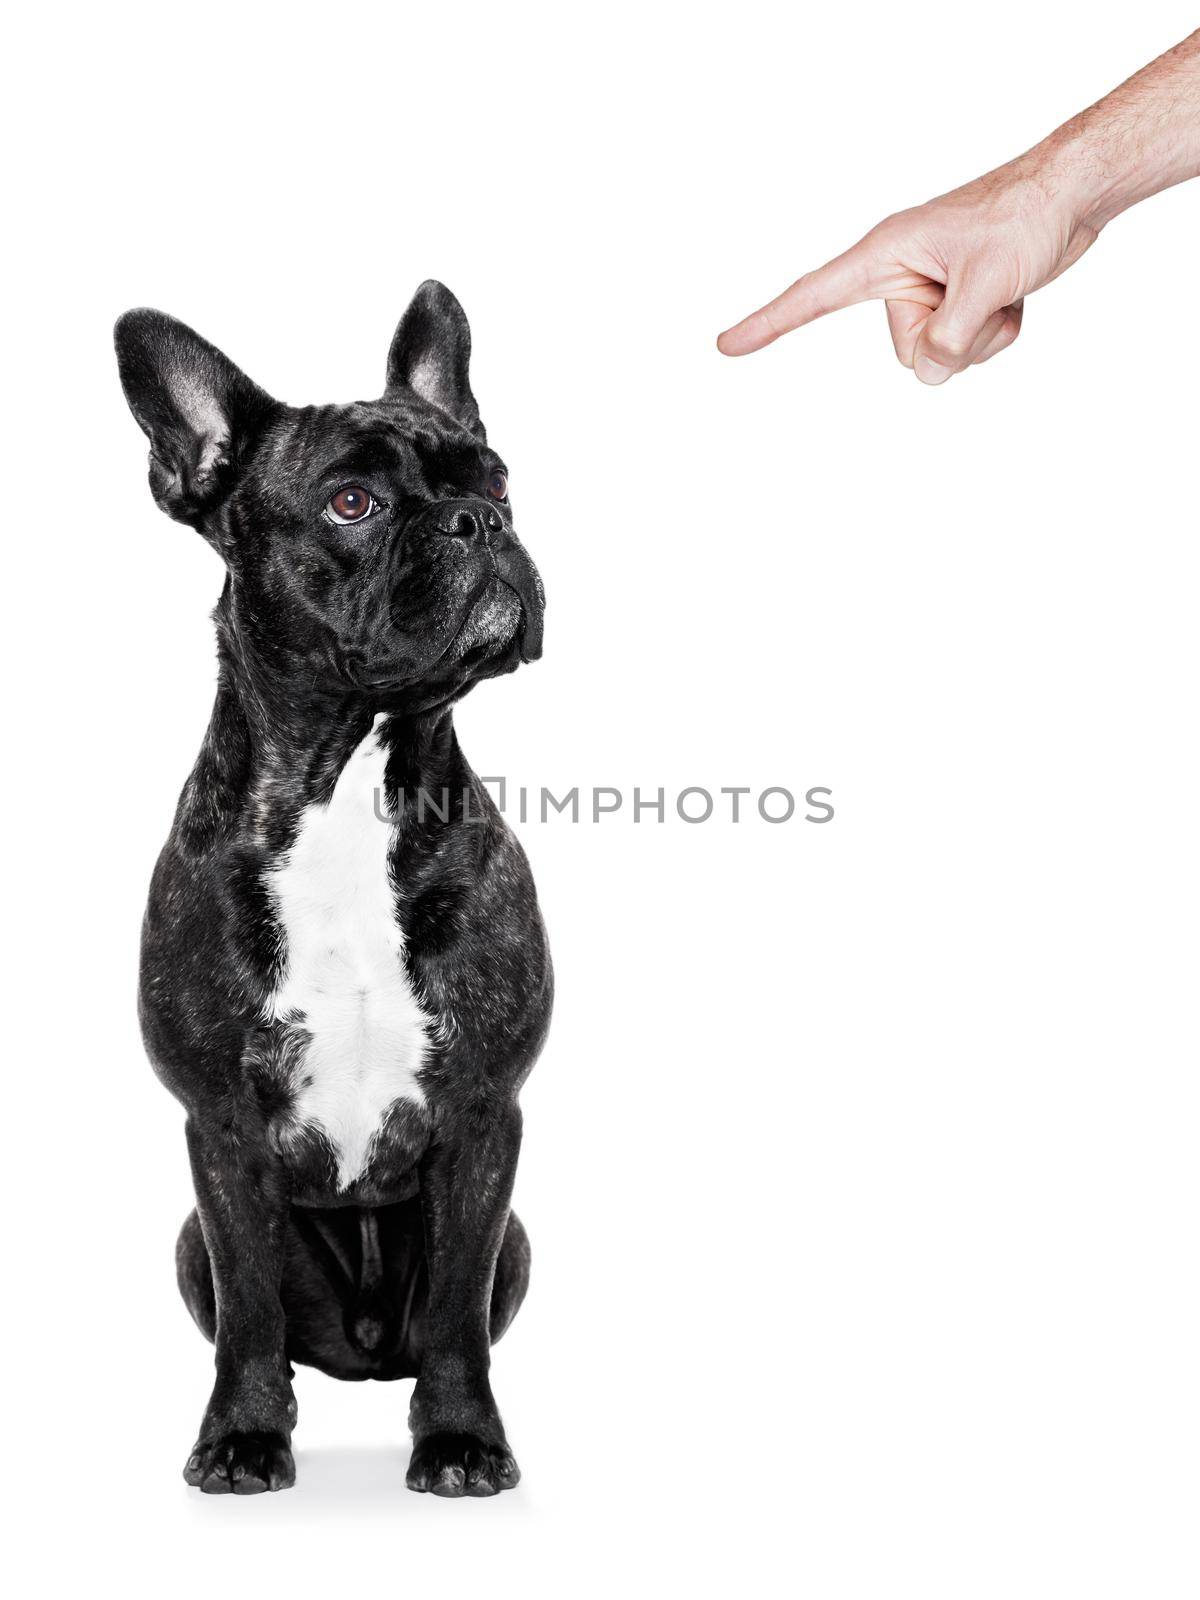 dog being punished by his owner with finger pointing out him, isolated on white background